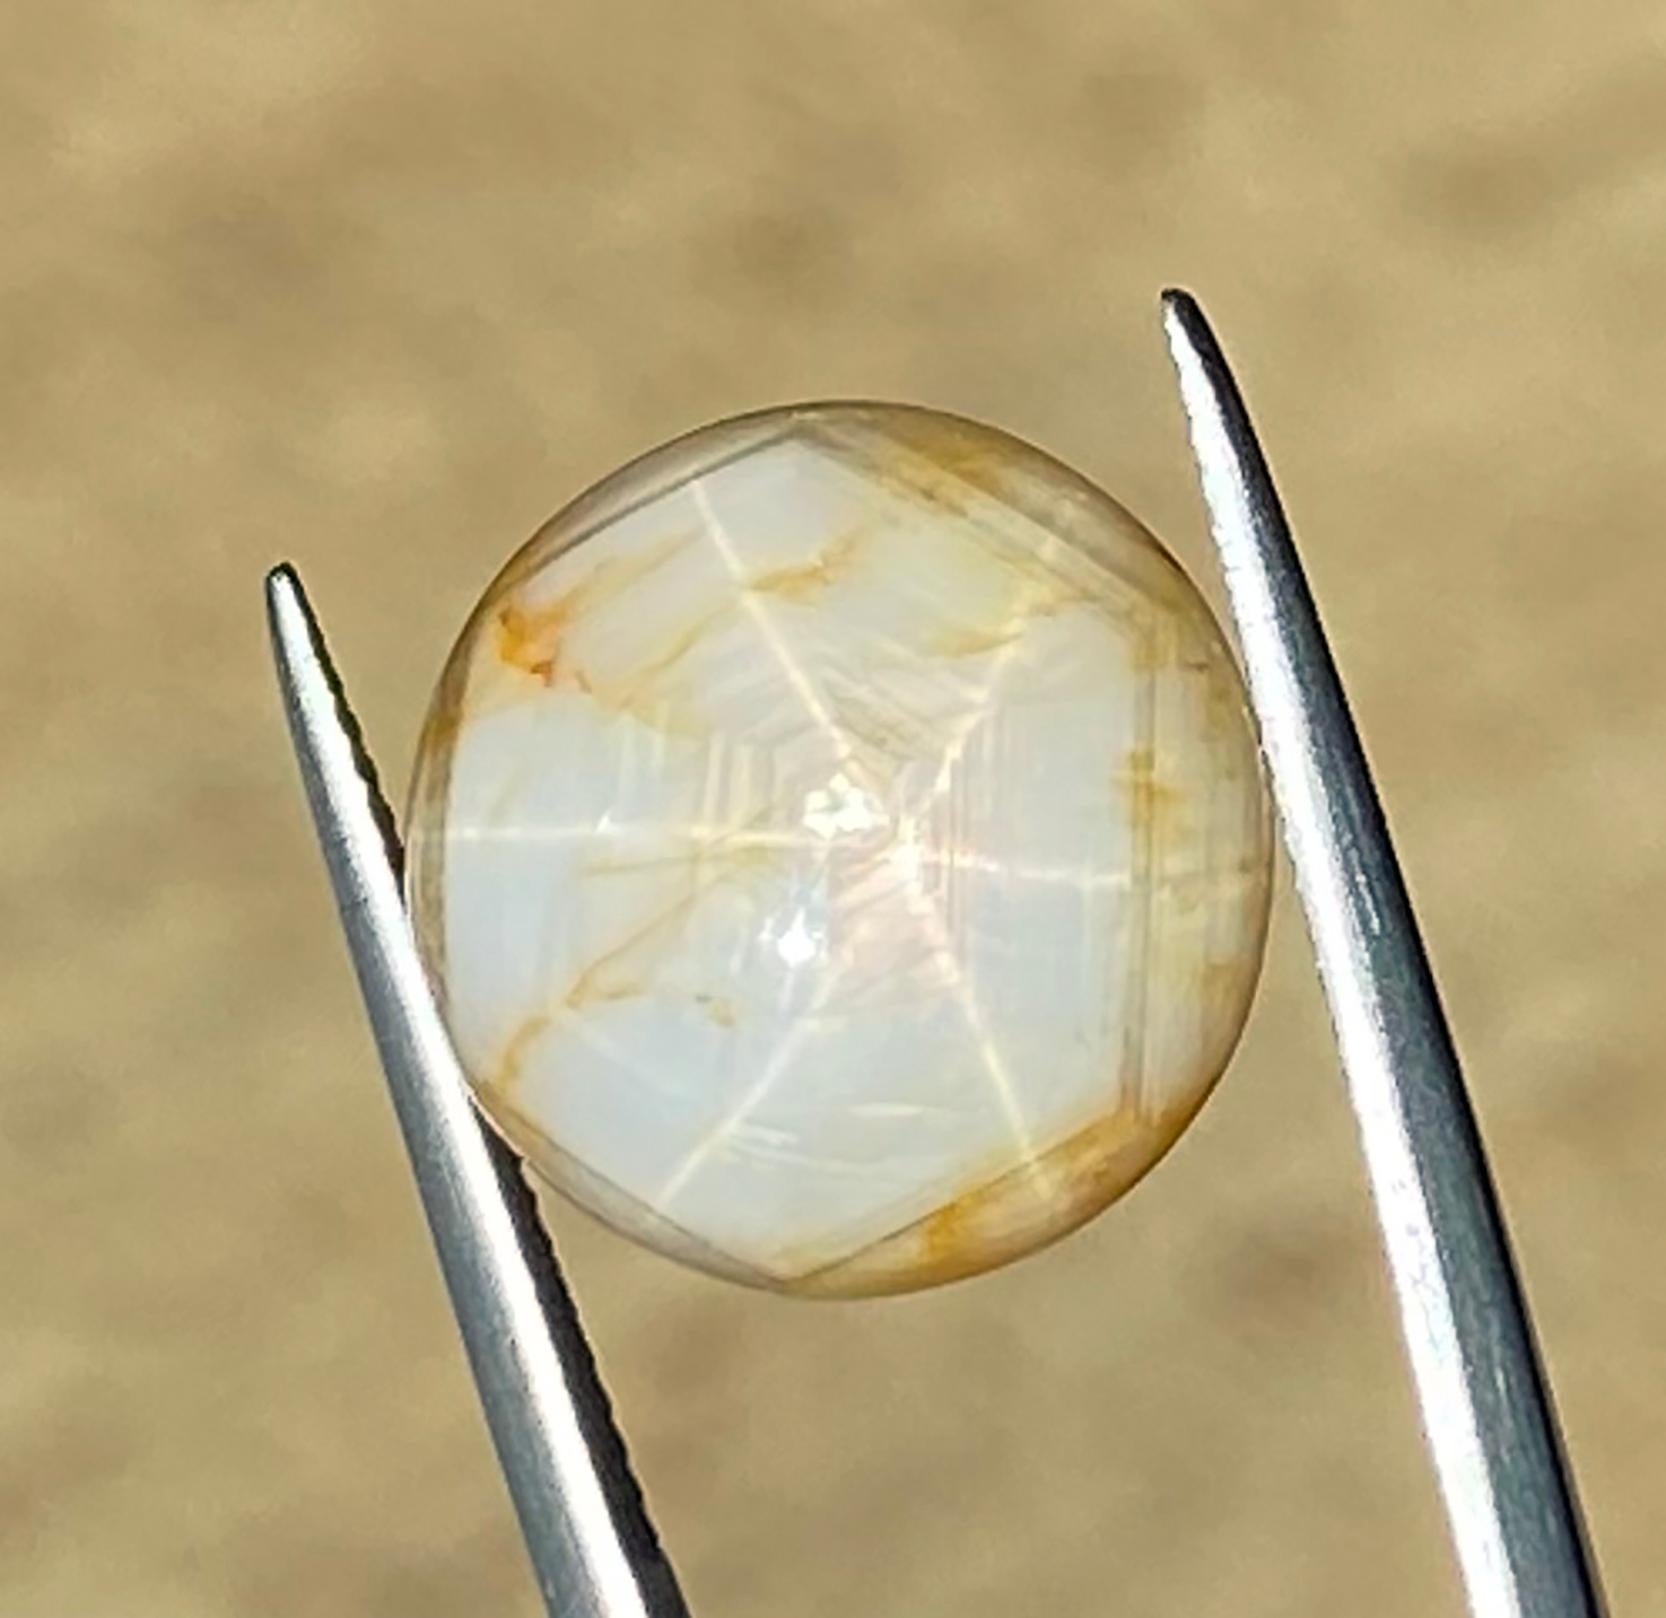 Milk & Honey Star Sapphire from Sri Lanka. This cabochon star sapphire is completely natural in color with no treatment or enhancement.
Asterism in gemstones refers to a phenomenon where a star-like pattern appears on the surface of a gemstone when